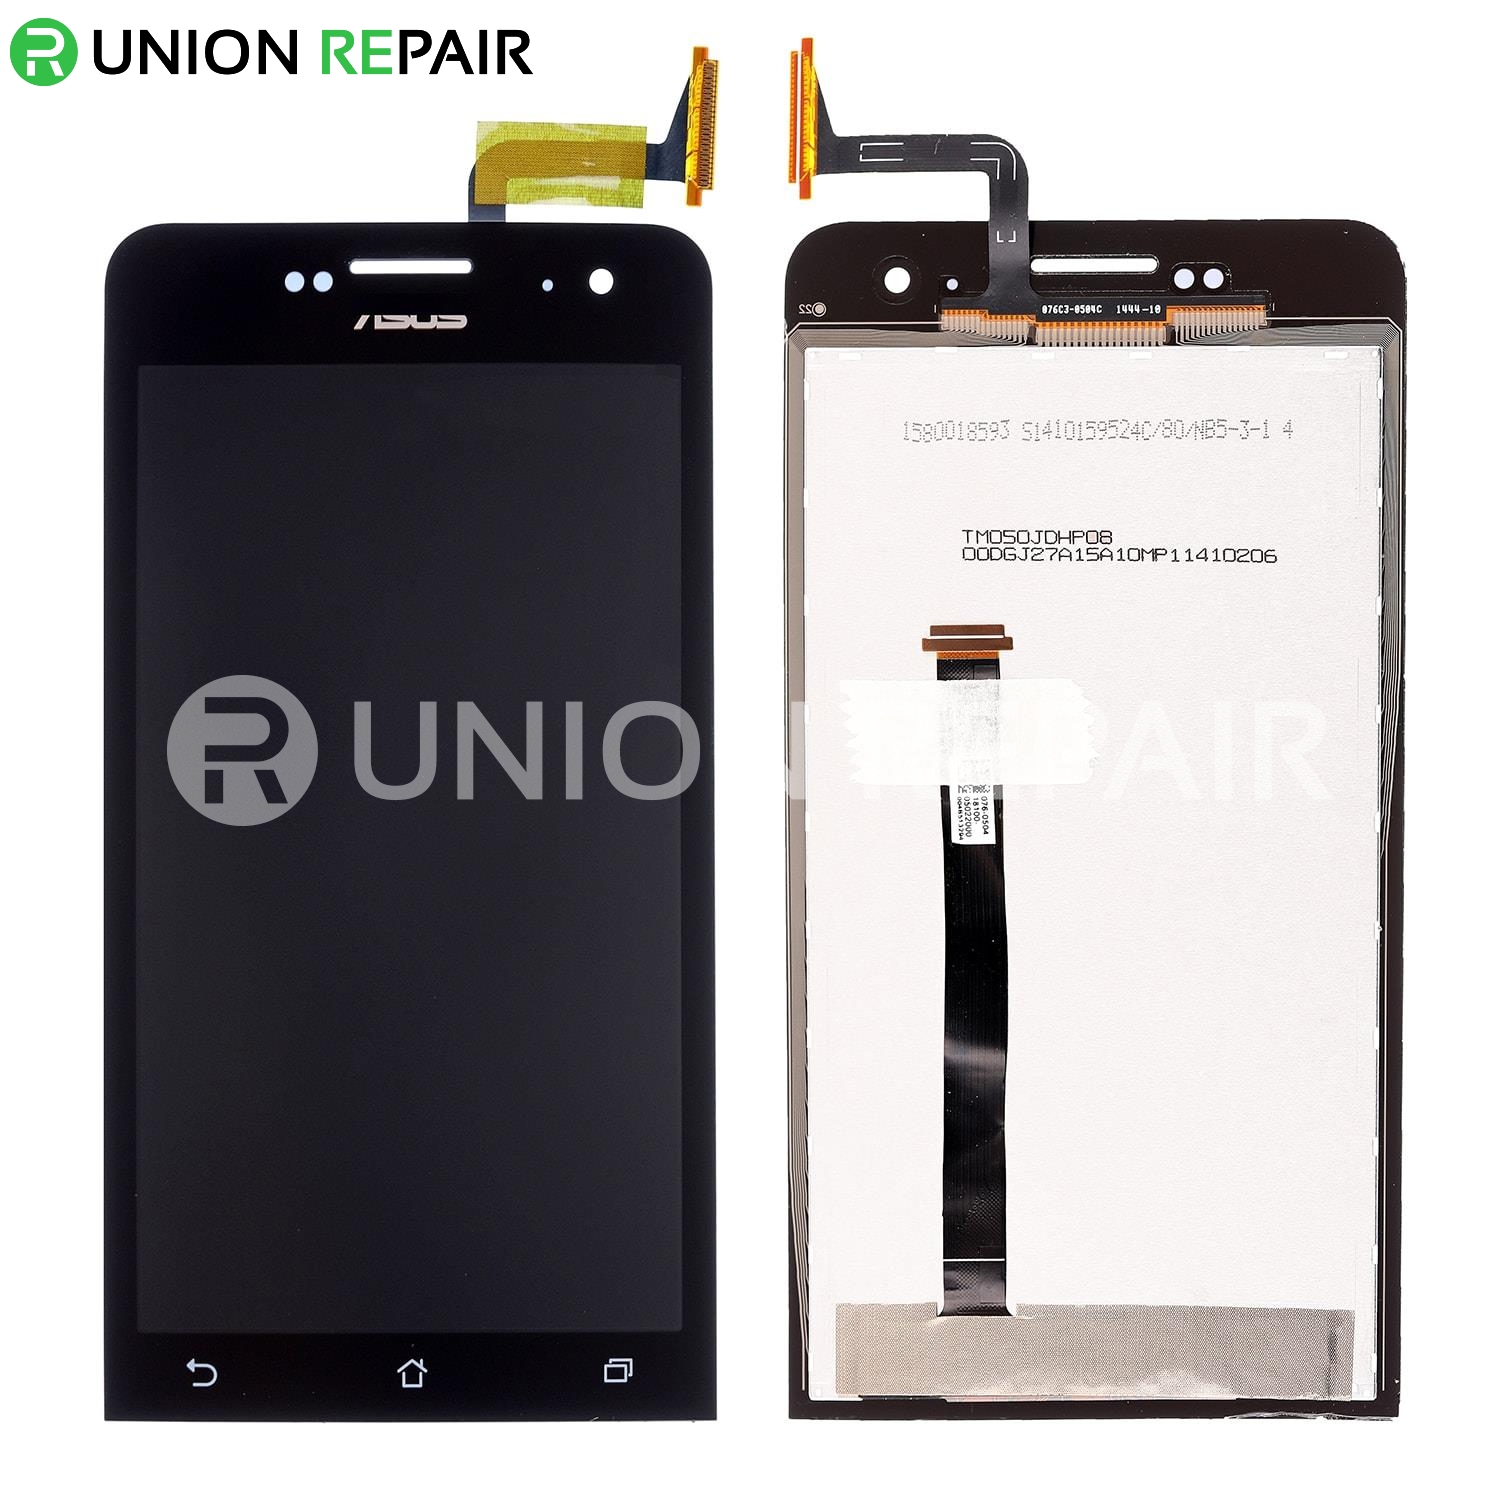 Replacement for Asus Zenfone 5 A500CG LCD Screen with Digitizer Assembly - Black